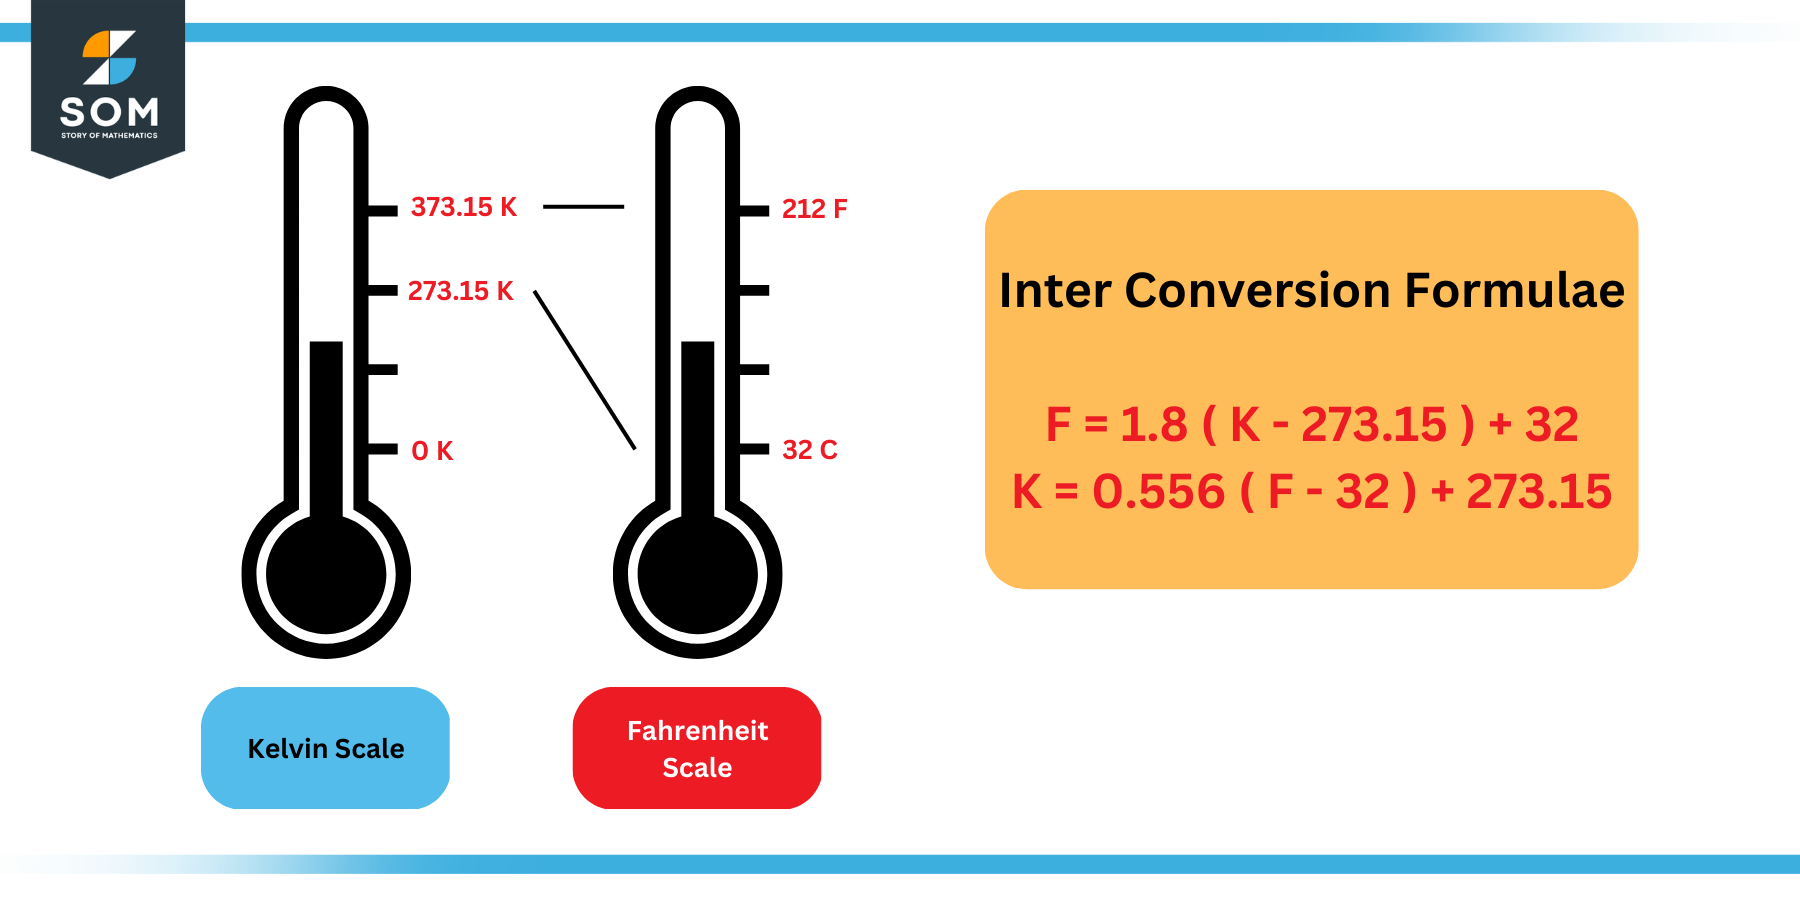 Inter conversion between Fahrenheit and Kelvin Scales